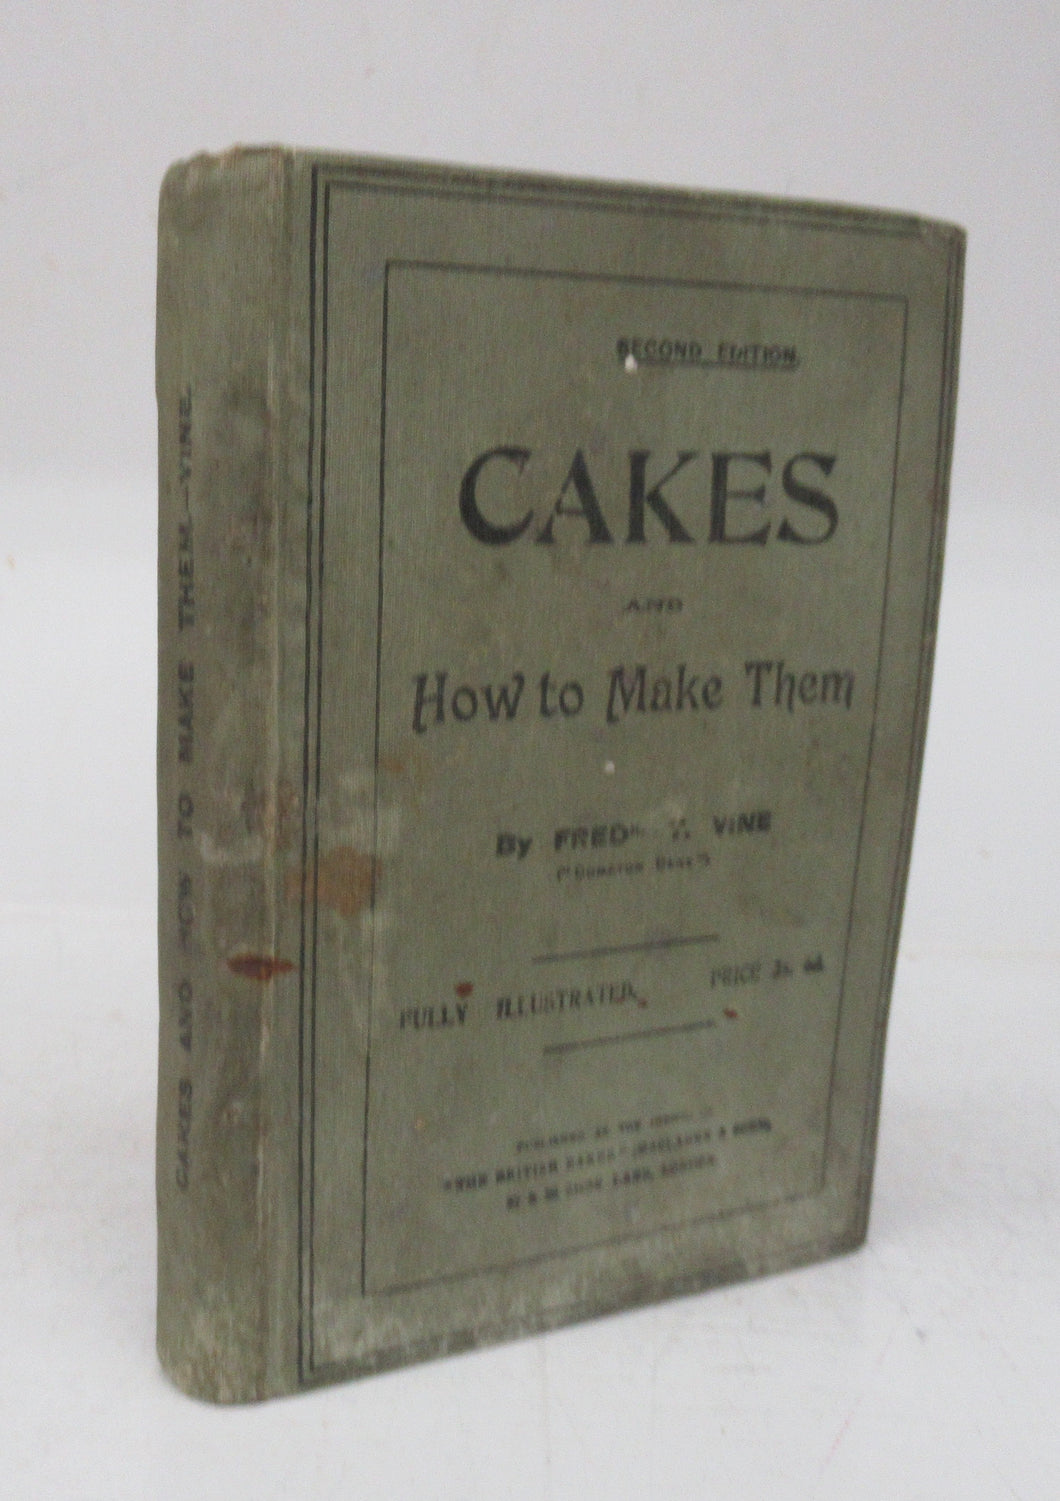 Cakes and How To Make Them